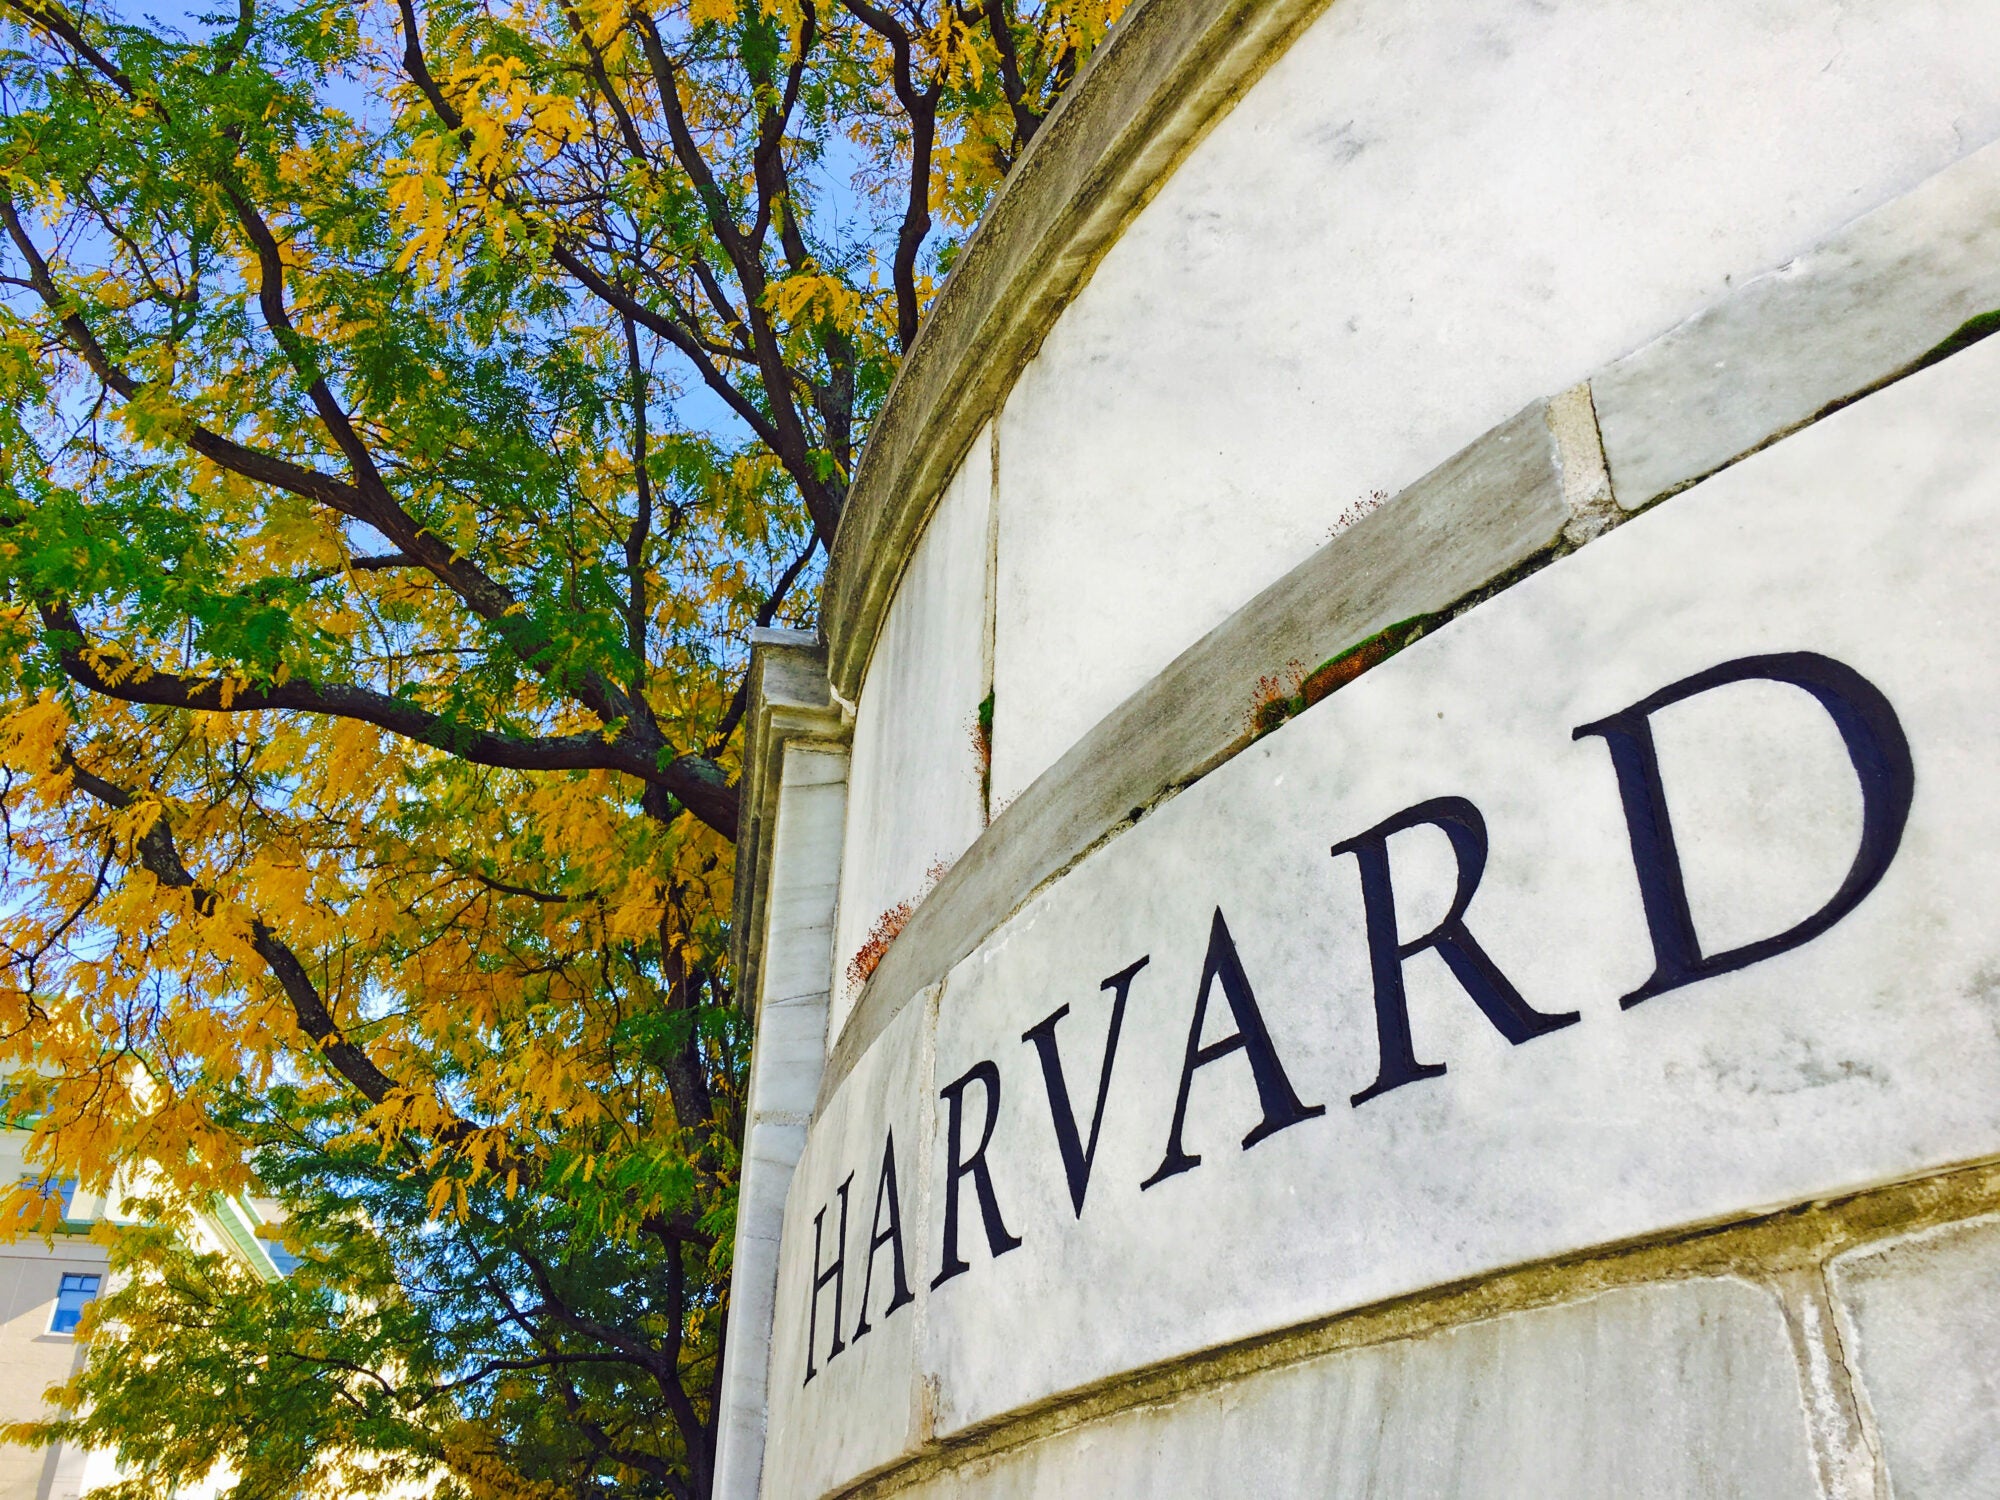 A marble wall with the word "Harvard" engraved on it with fall foliage behind it